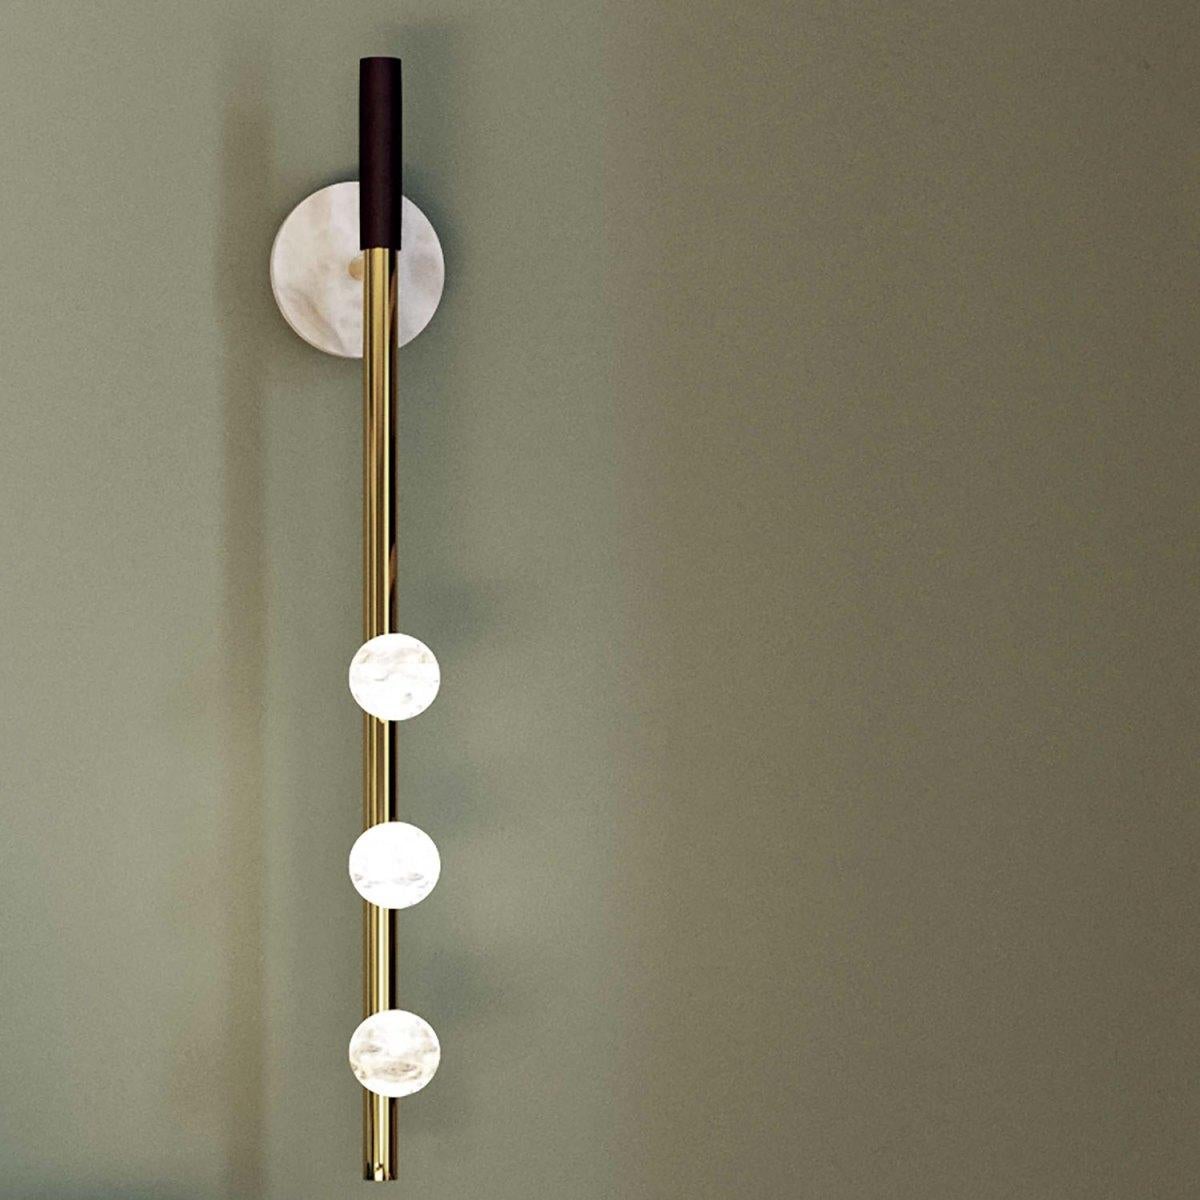 Demetra Ruggine Of Florence Metal Wall Lamp by Alabastro Italiano
Dimensions: D 9 x W 10 x H 60 cm.
Materials: White alabaster, metal and leather.

Available in different finishes: Shiny Silver, Bronze, Brushed Brass, Ruggine of Florence, Brushed